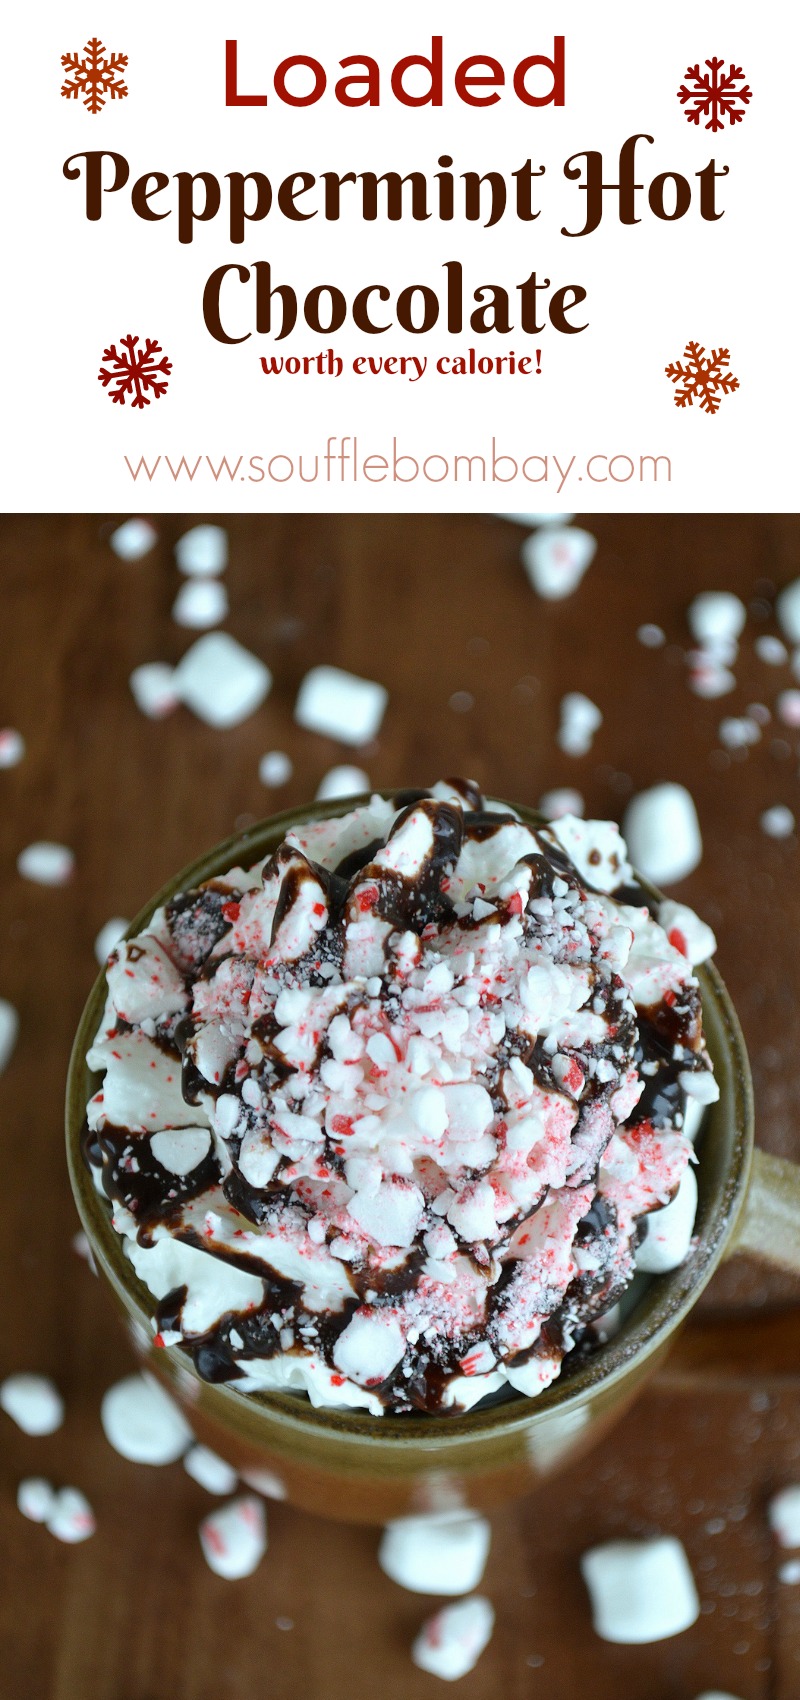 Peppermint Hot Chocolate - Loaded!